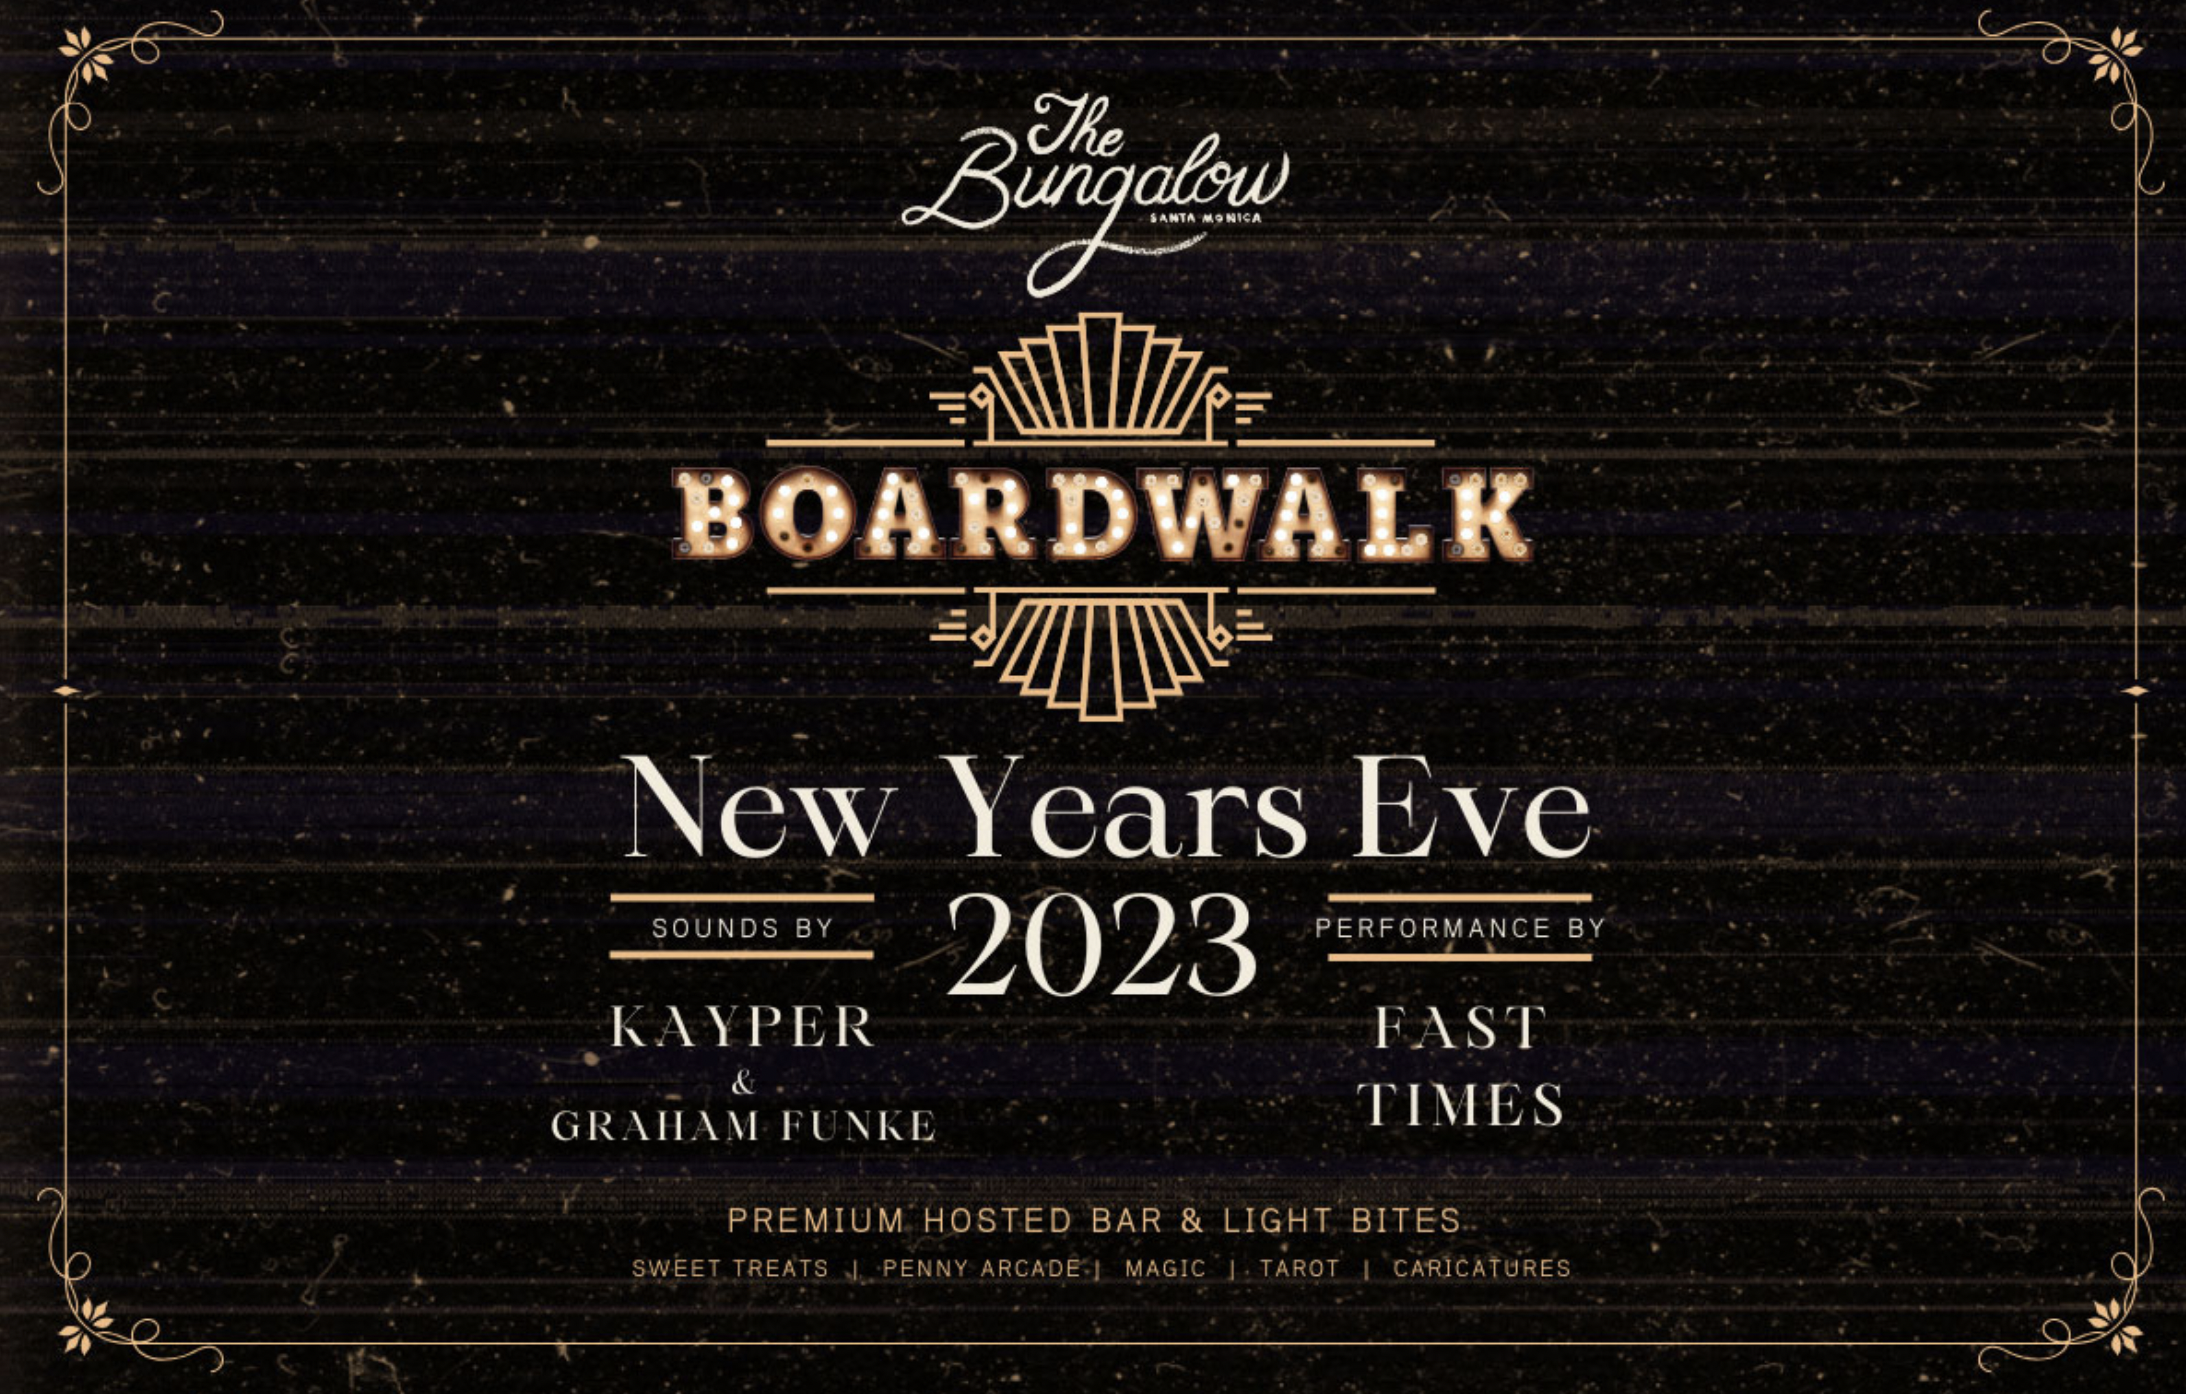 Boardwalk NYE Party at The Bungalow